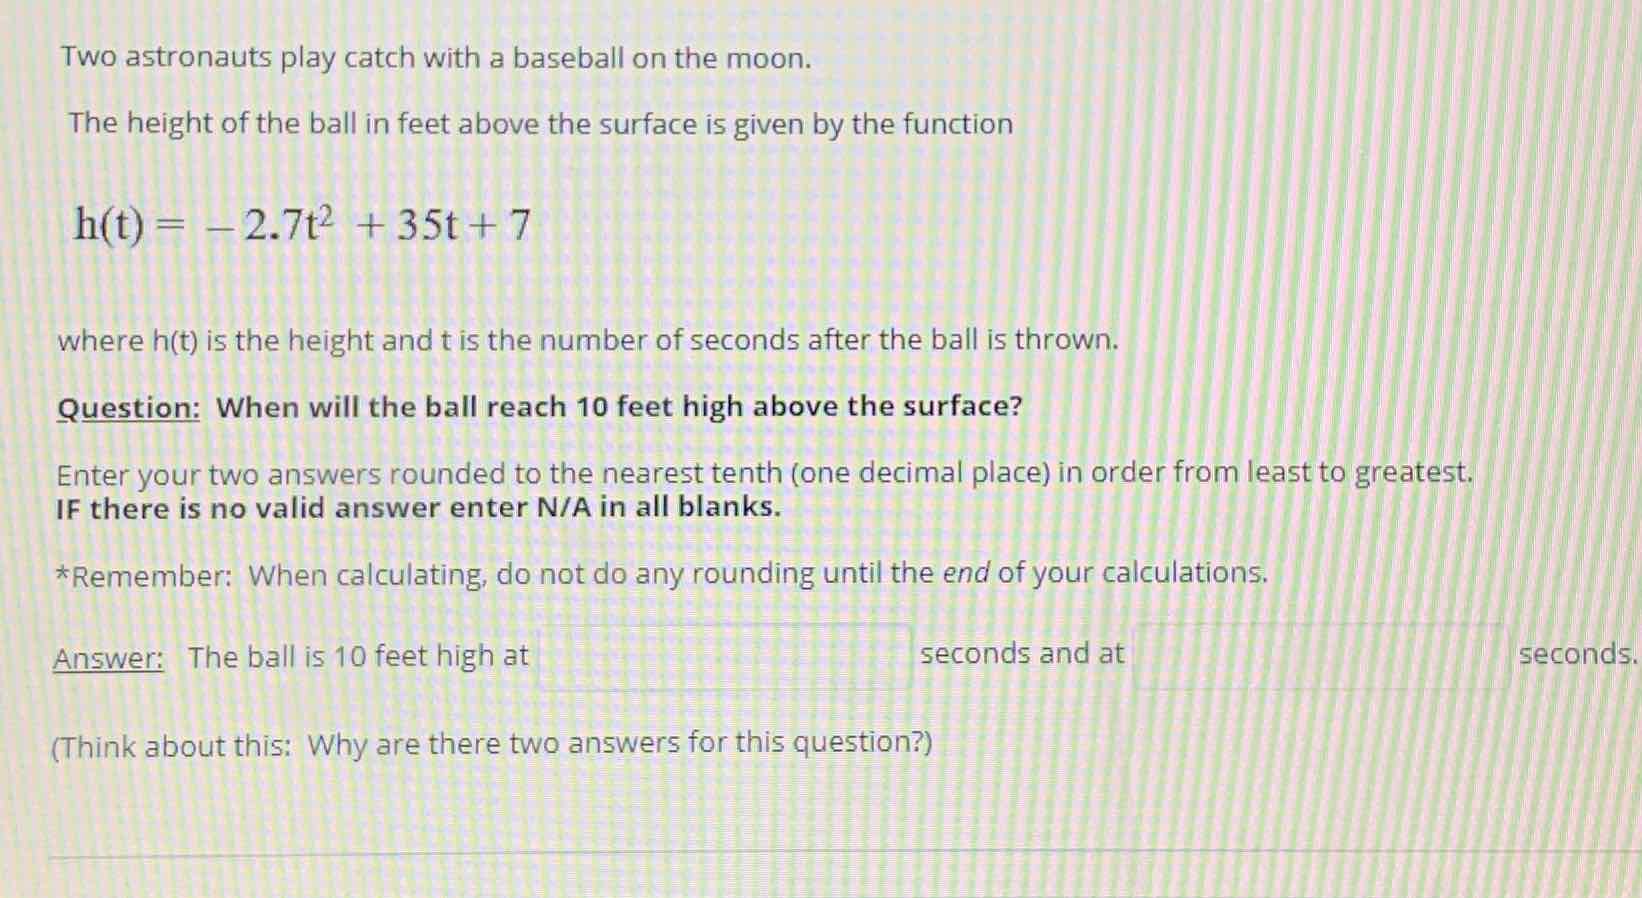 Two astronauts play catch with a baseball on the moon.
The height of the ball in feet above the surface is given by the function
\[
h(t)=-2.7 t^{2}+35 t+7
\]
where \( h(t) \) is the height and \( t \) is the number of seconds after the ball is thrown.
Question: When will the ball reach 10 feet high above the surface?
Enter your two answers rounded to the nearest tenth (one decimal place) in order from least to greatest. IF there is no valid answer enter N/A in all blanks.
* Remember: When calculating, do not do any rounding until the end of your calculations.
Answer: The ball is 10 feet high at
seconds and at seconds.
(Think about this: Why are there two answers for this question?)